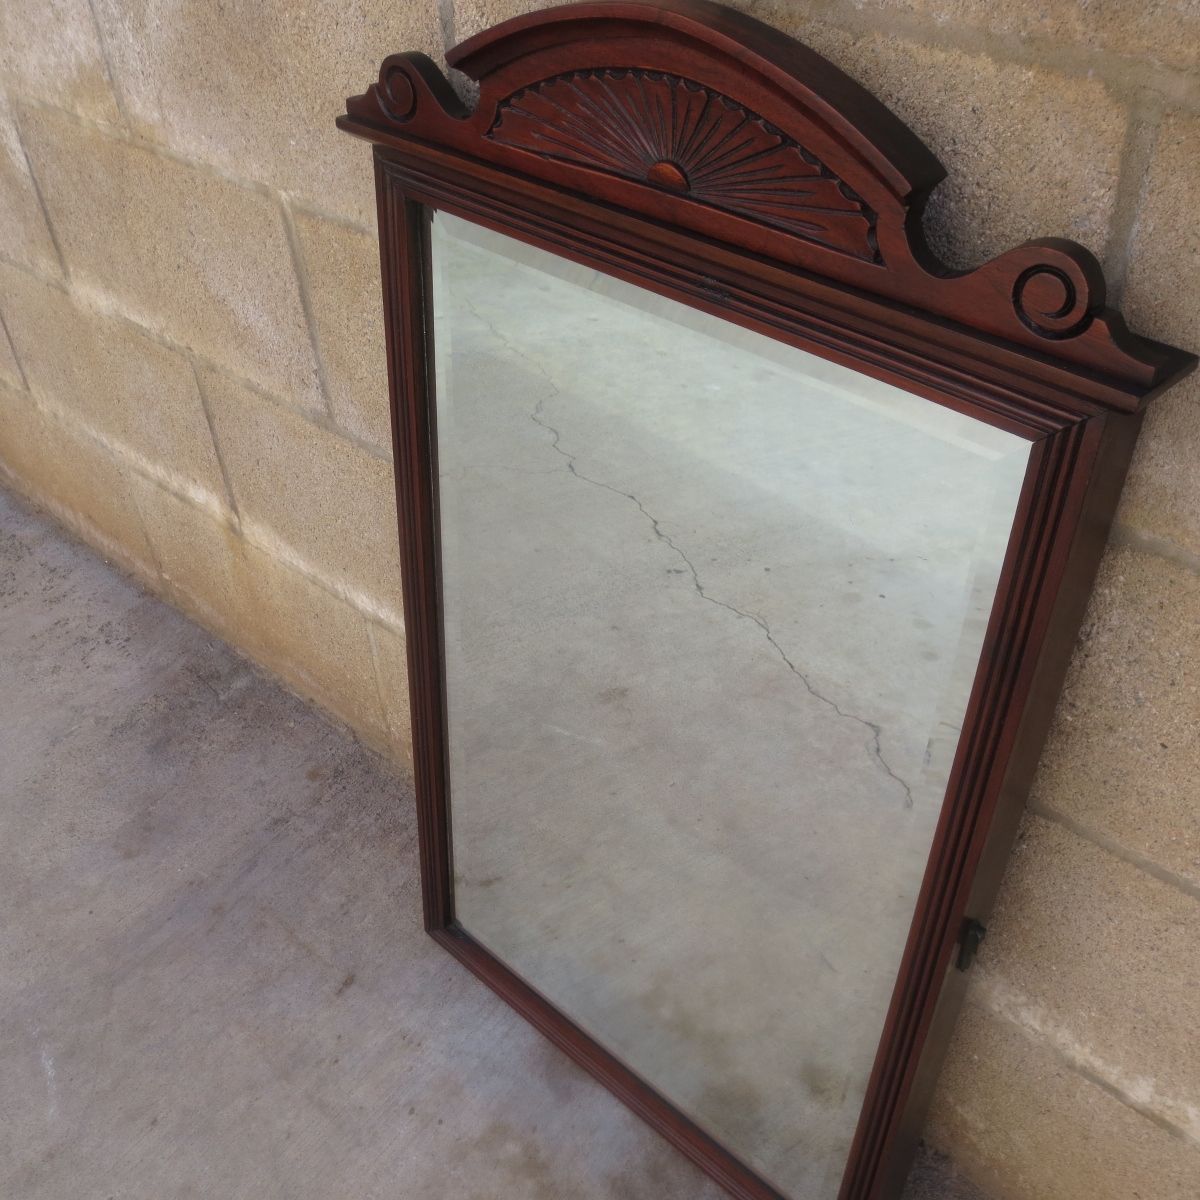 Antique Mirrors Vintage Mirrors Antique Wall Mirrors And French Pertaining To Antique Mirror Online (View 5 of 15)